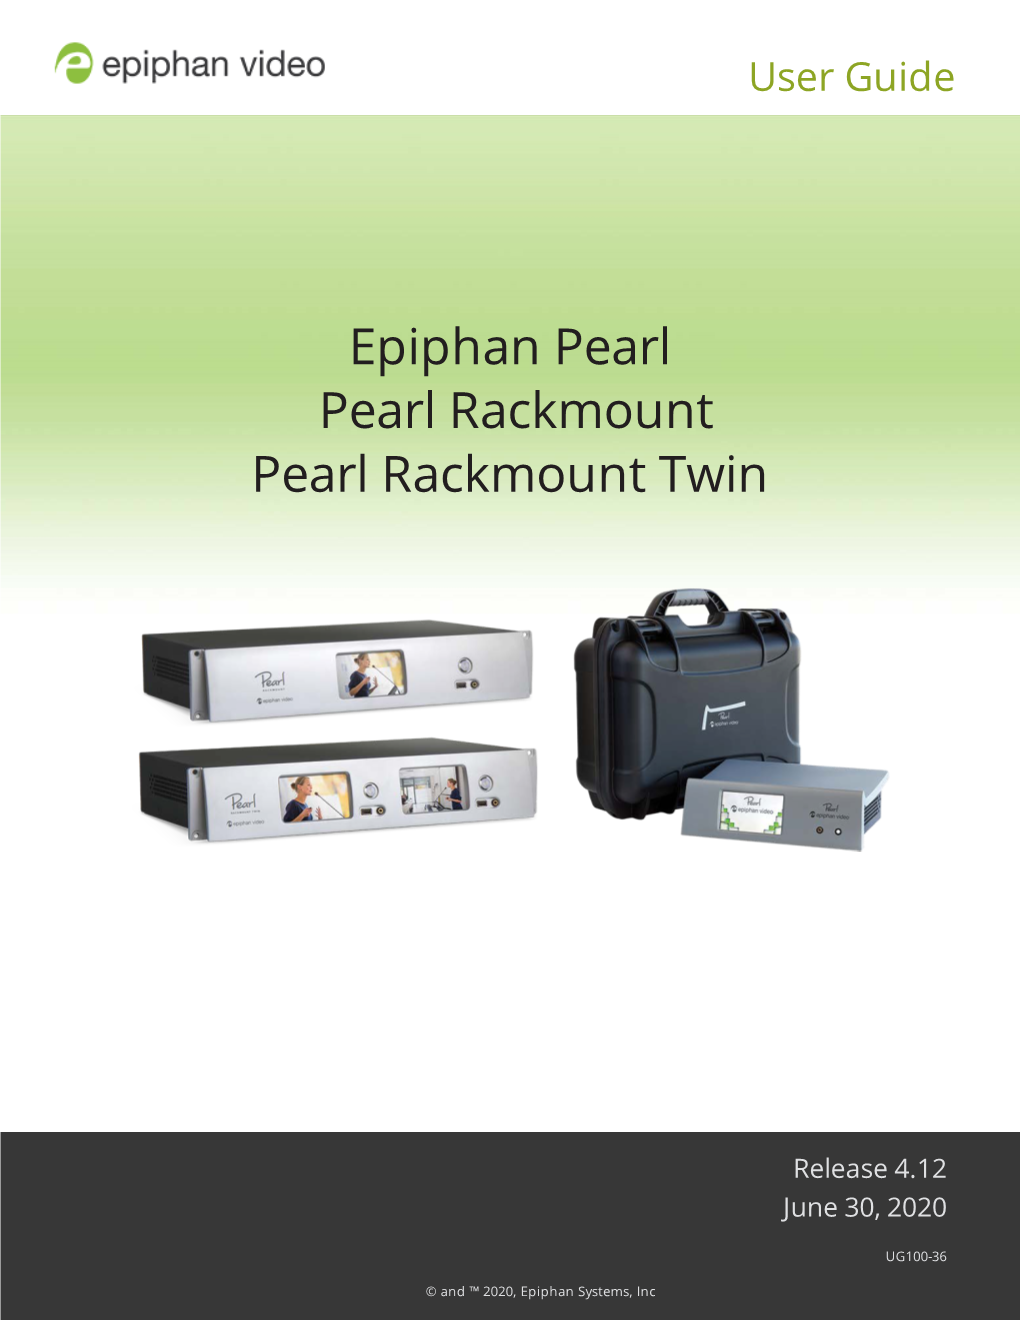 Epiphan Pearl User Guide Live